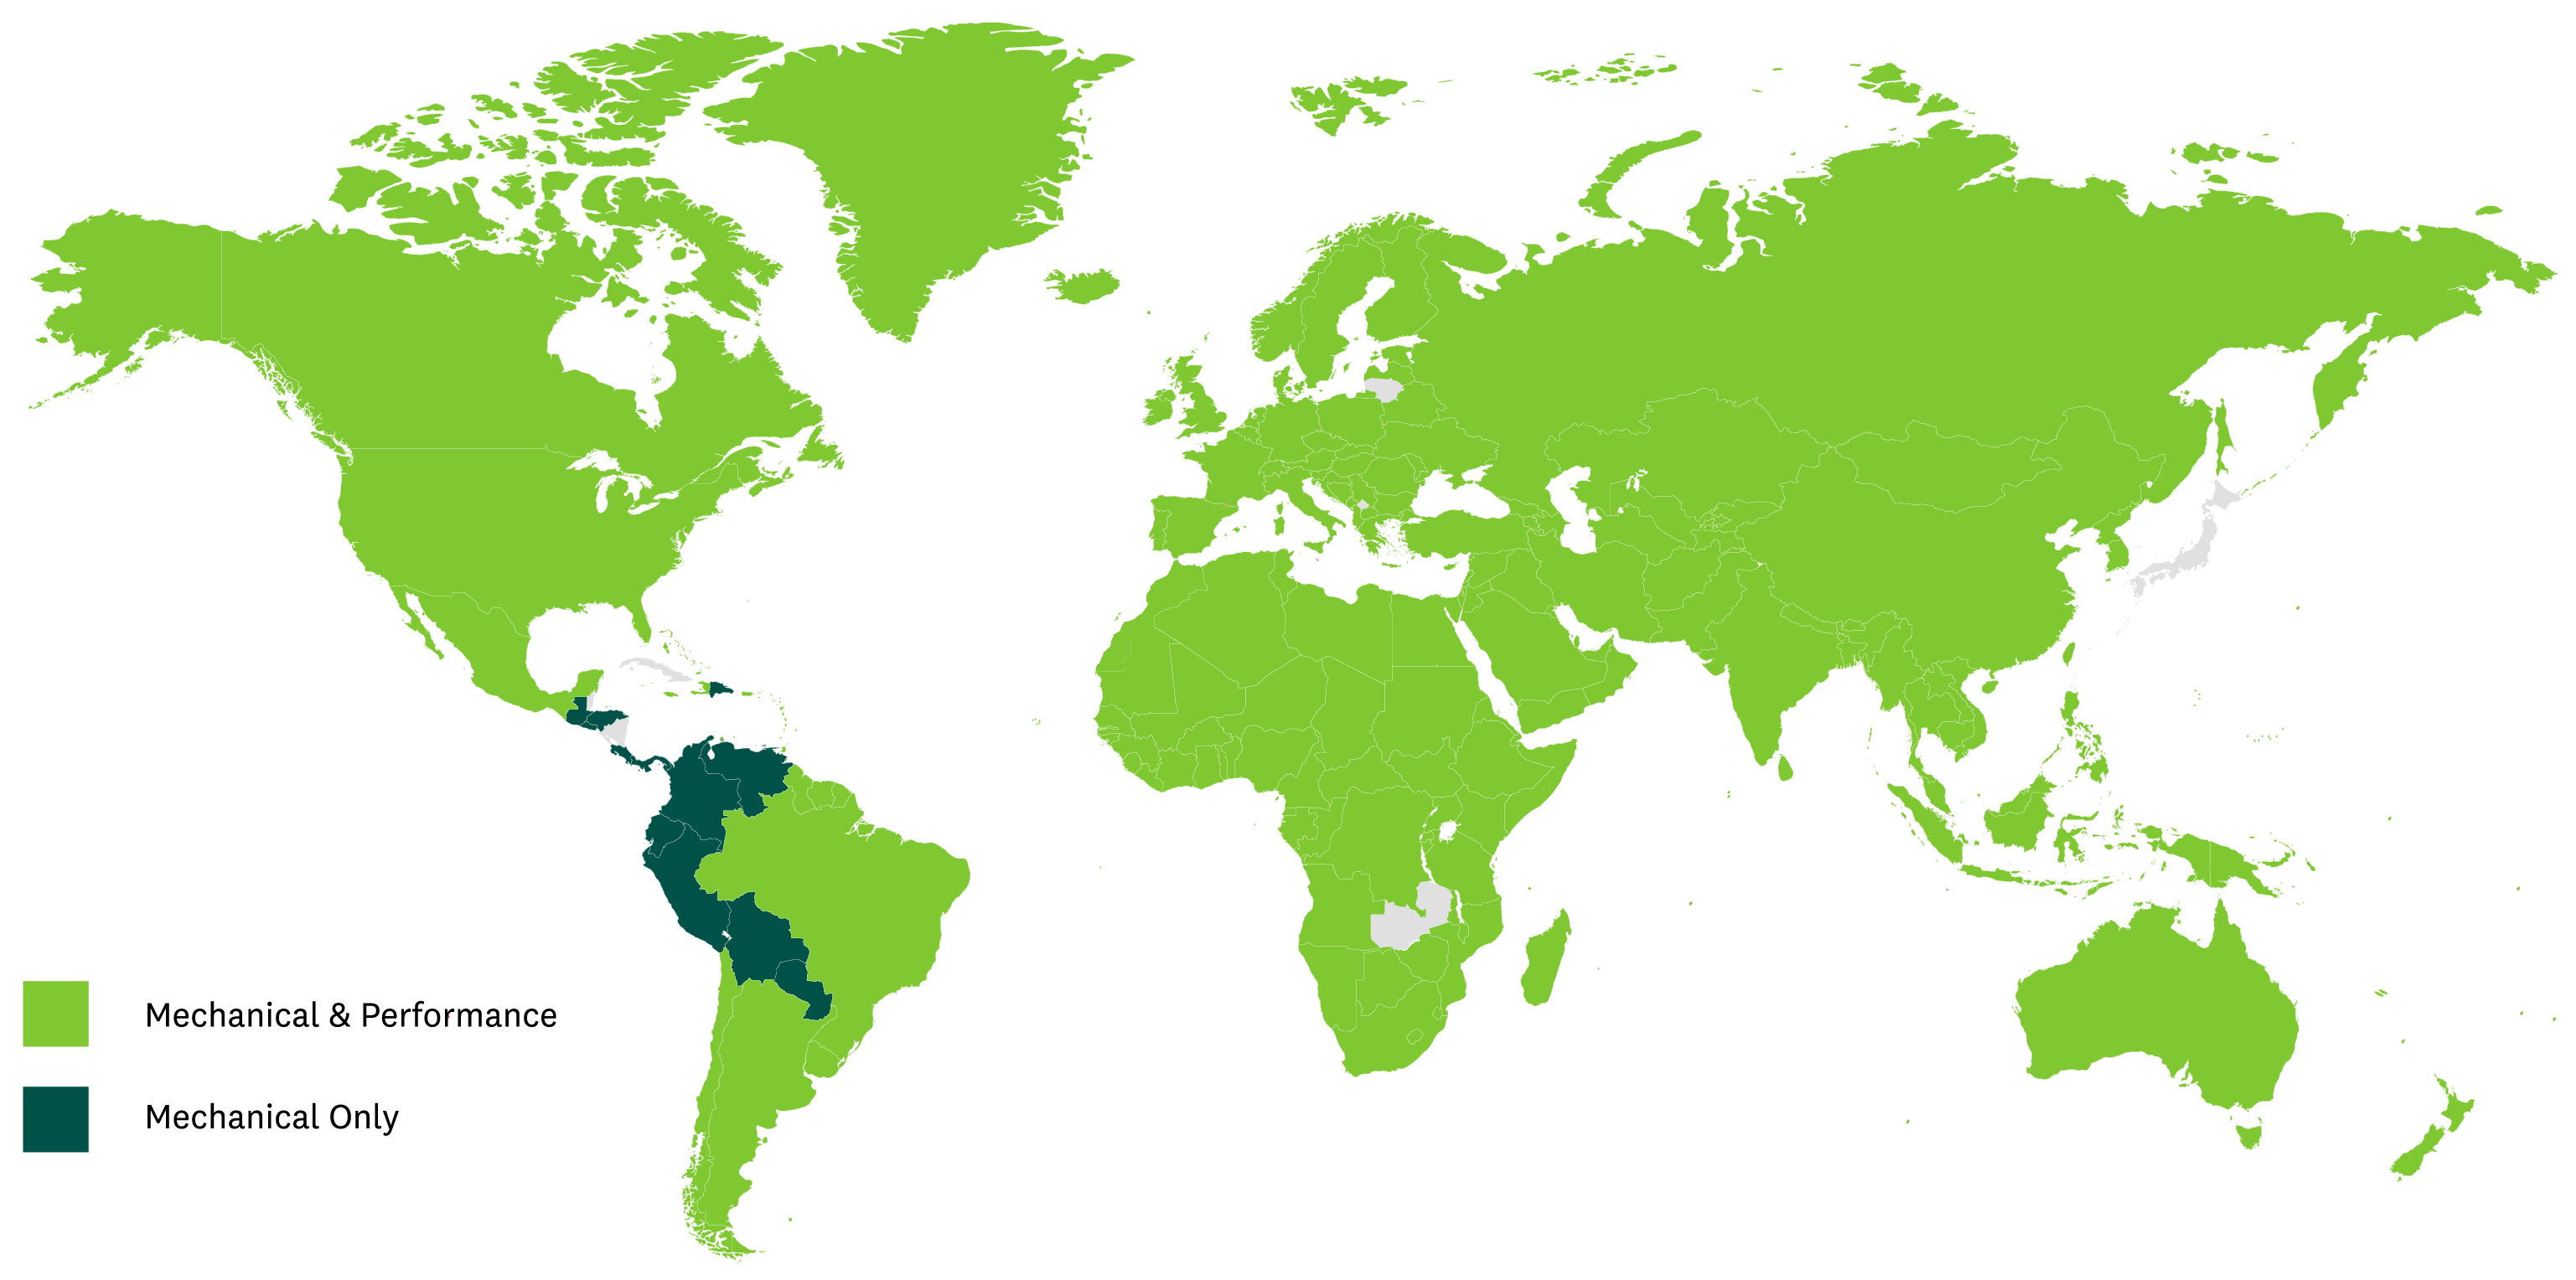 Songtrust global coverage map showing the countries where Songtrust collects from and the types of royalties Songtrust collects